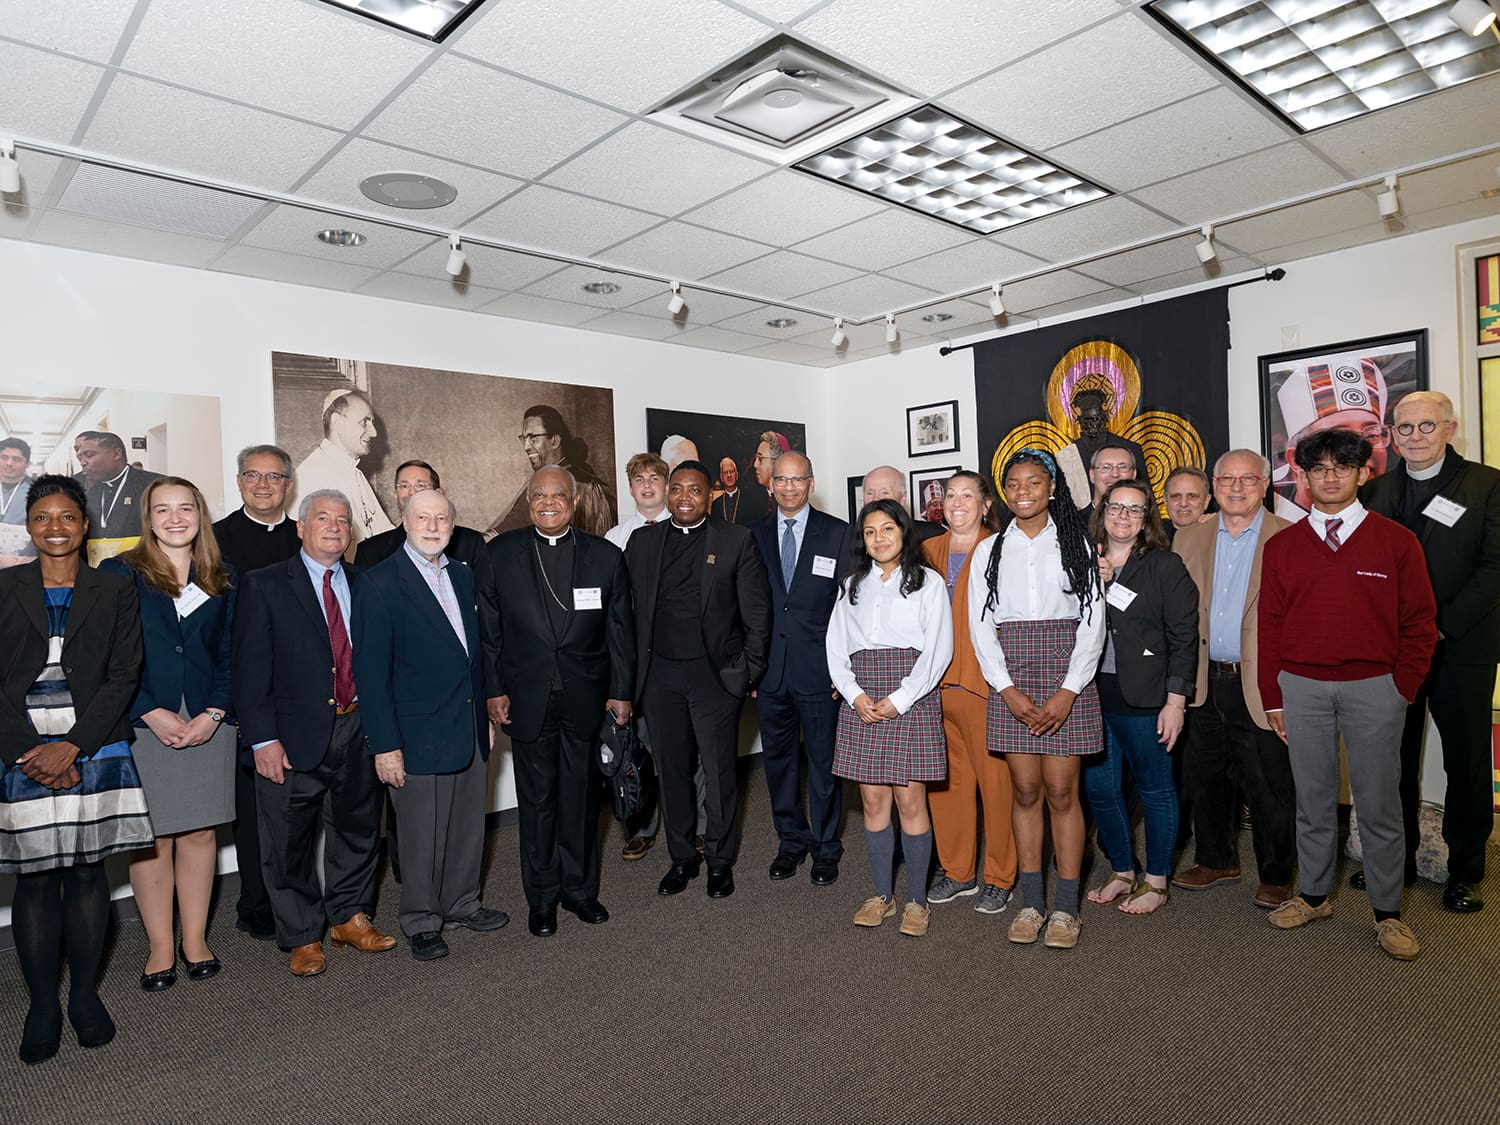 Student ambassdors from Our Lady of Mercy High School in Fayetteville visited with Jewish and Catholic leaders May 9 at the Lyke House Catholic Center in Atlanta. Faith leaders talked about racism and other topics at the three-day event, which included stops at civil rights sites in Alabama. Photo by Johnathon Kelso